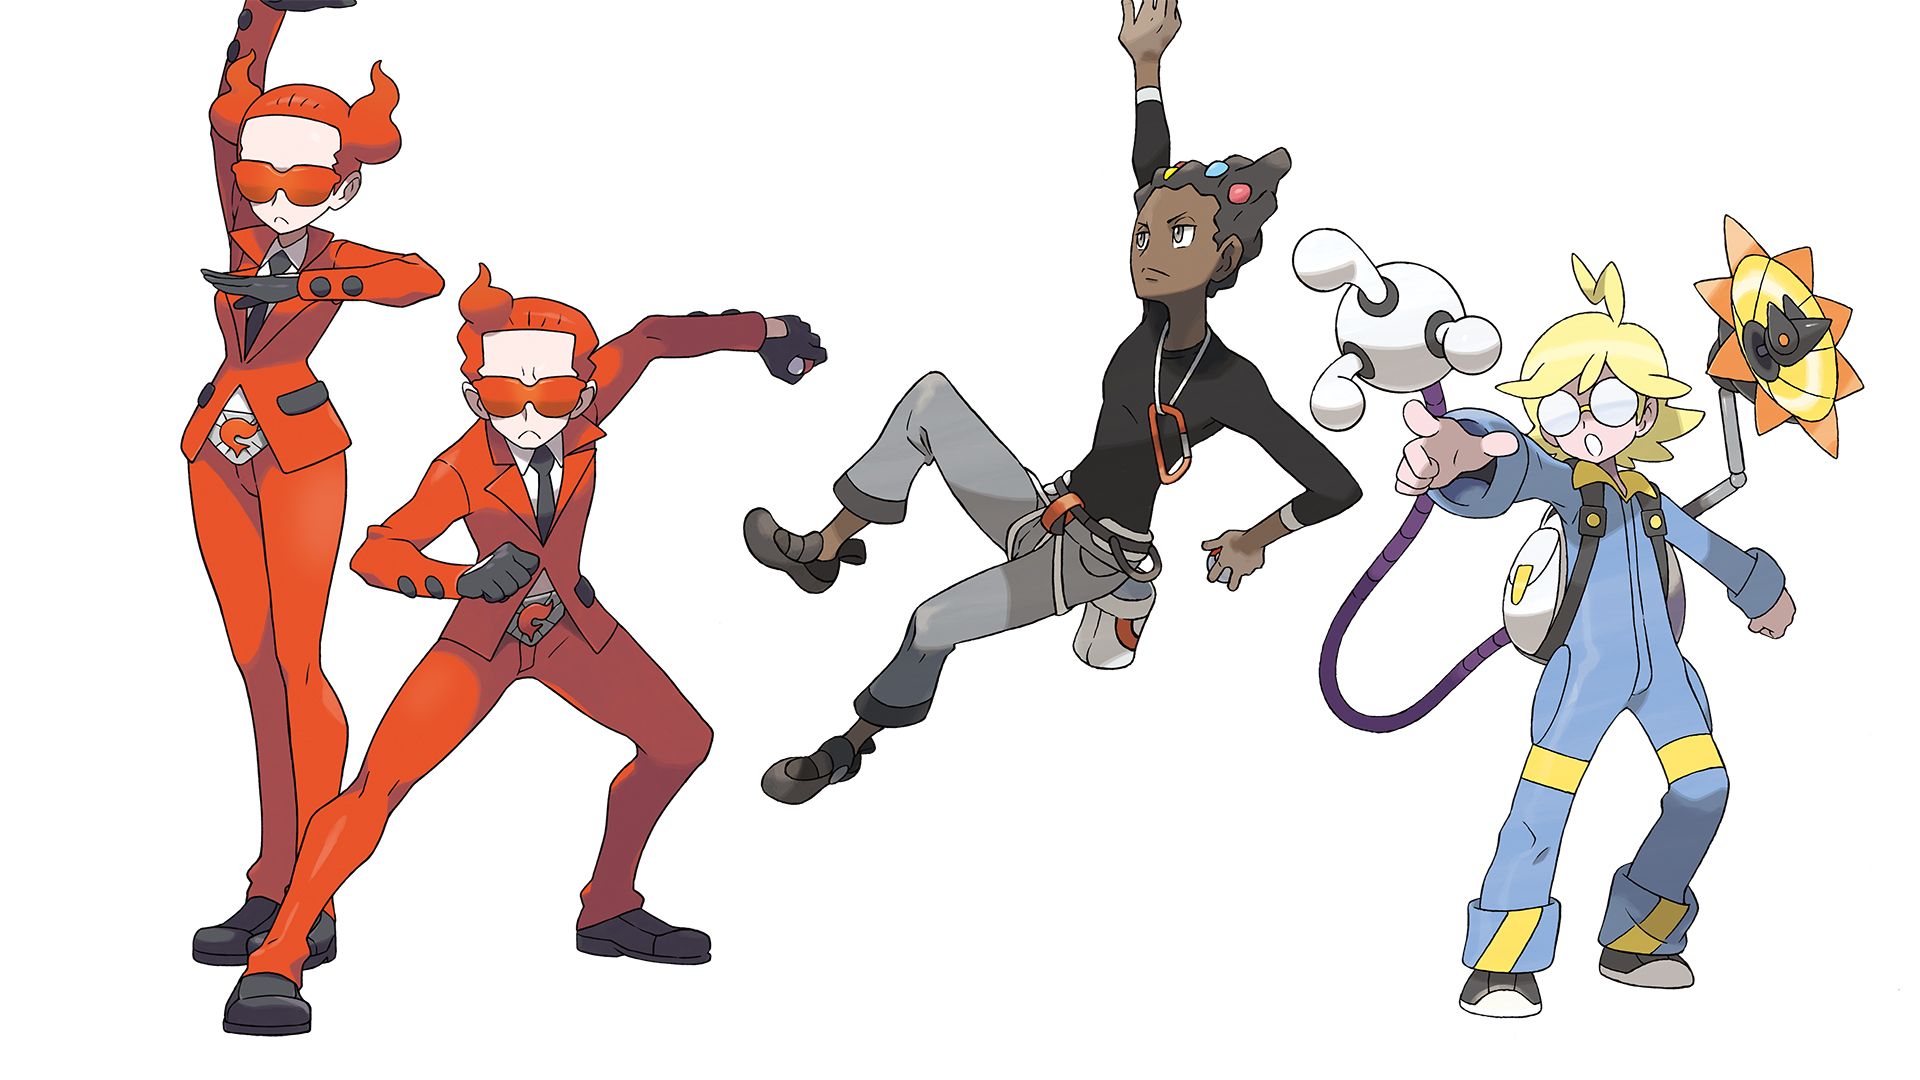 Professor Sycamore Introduces Five New Pokemon And More For X And Y